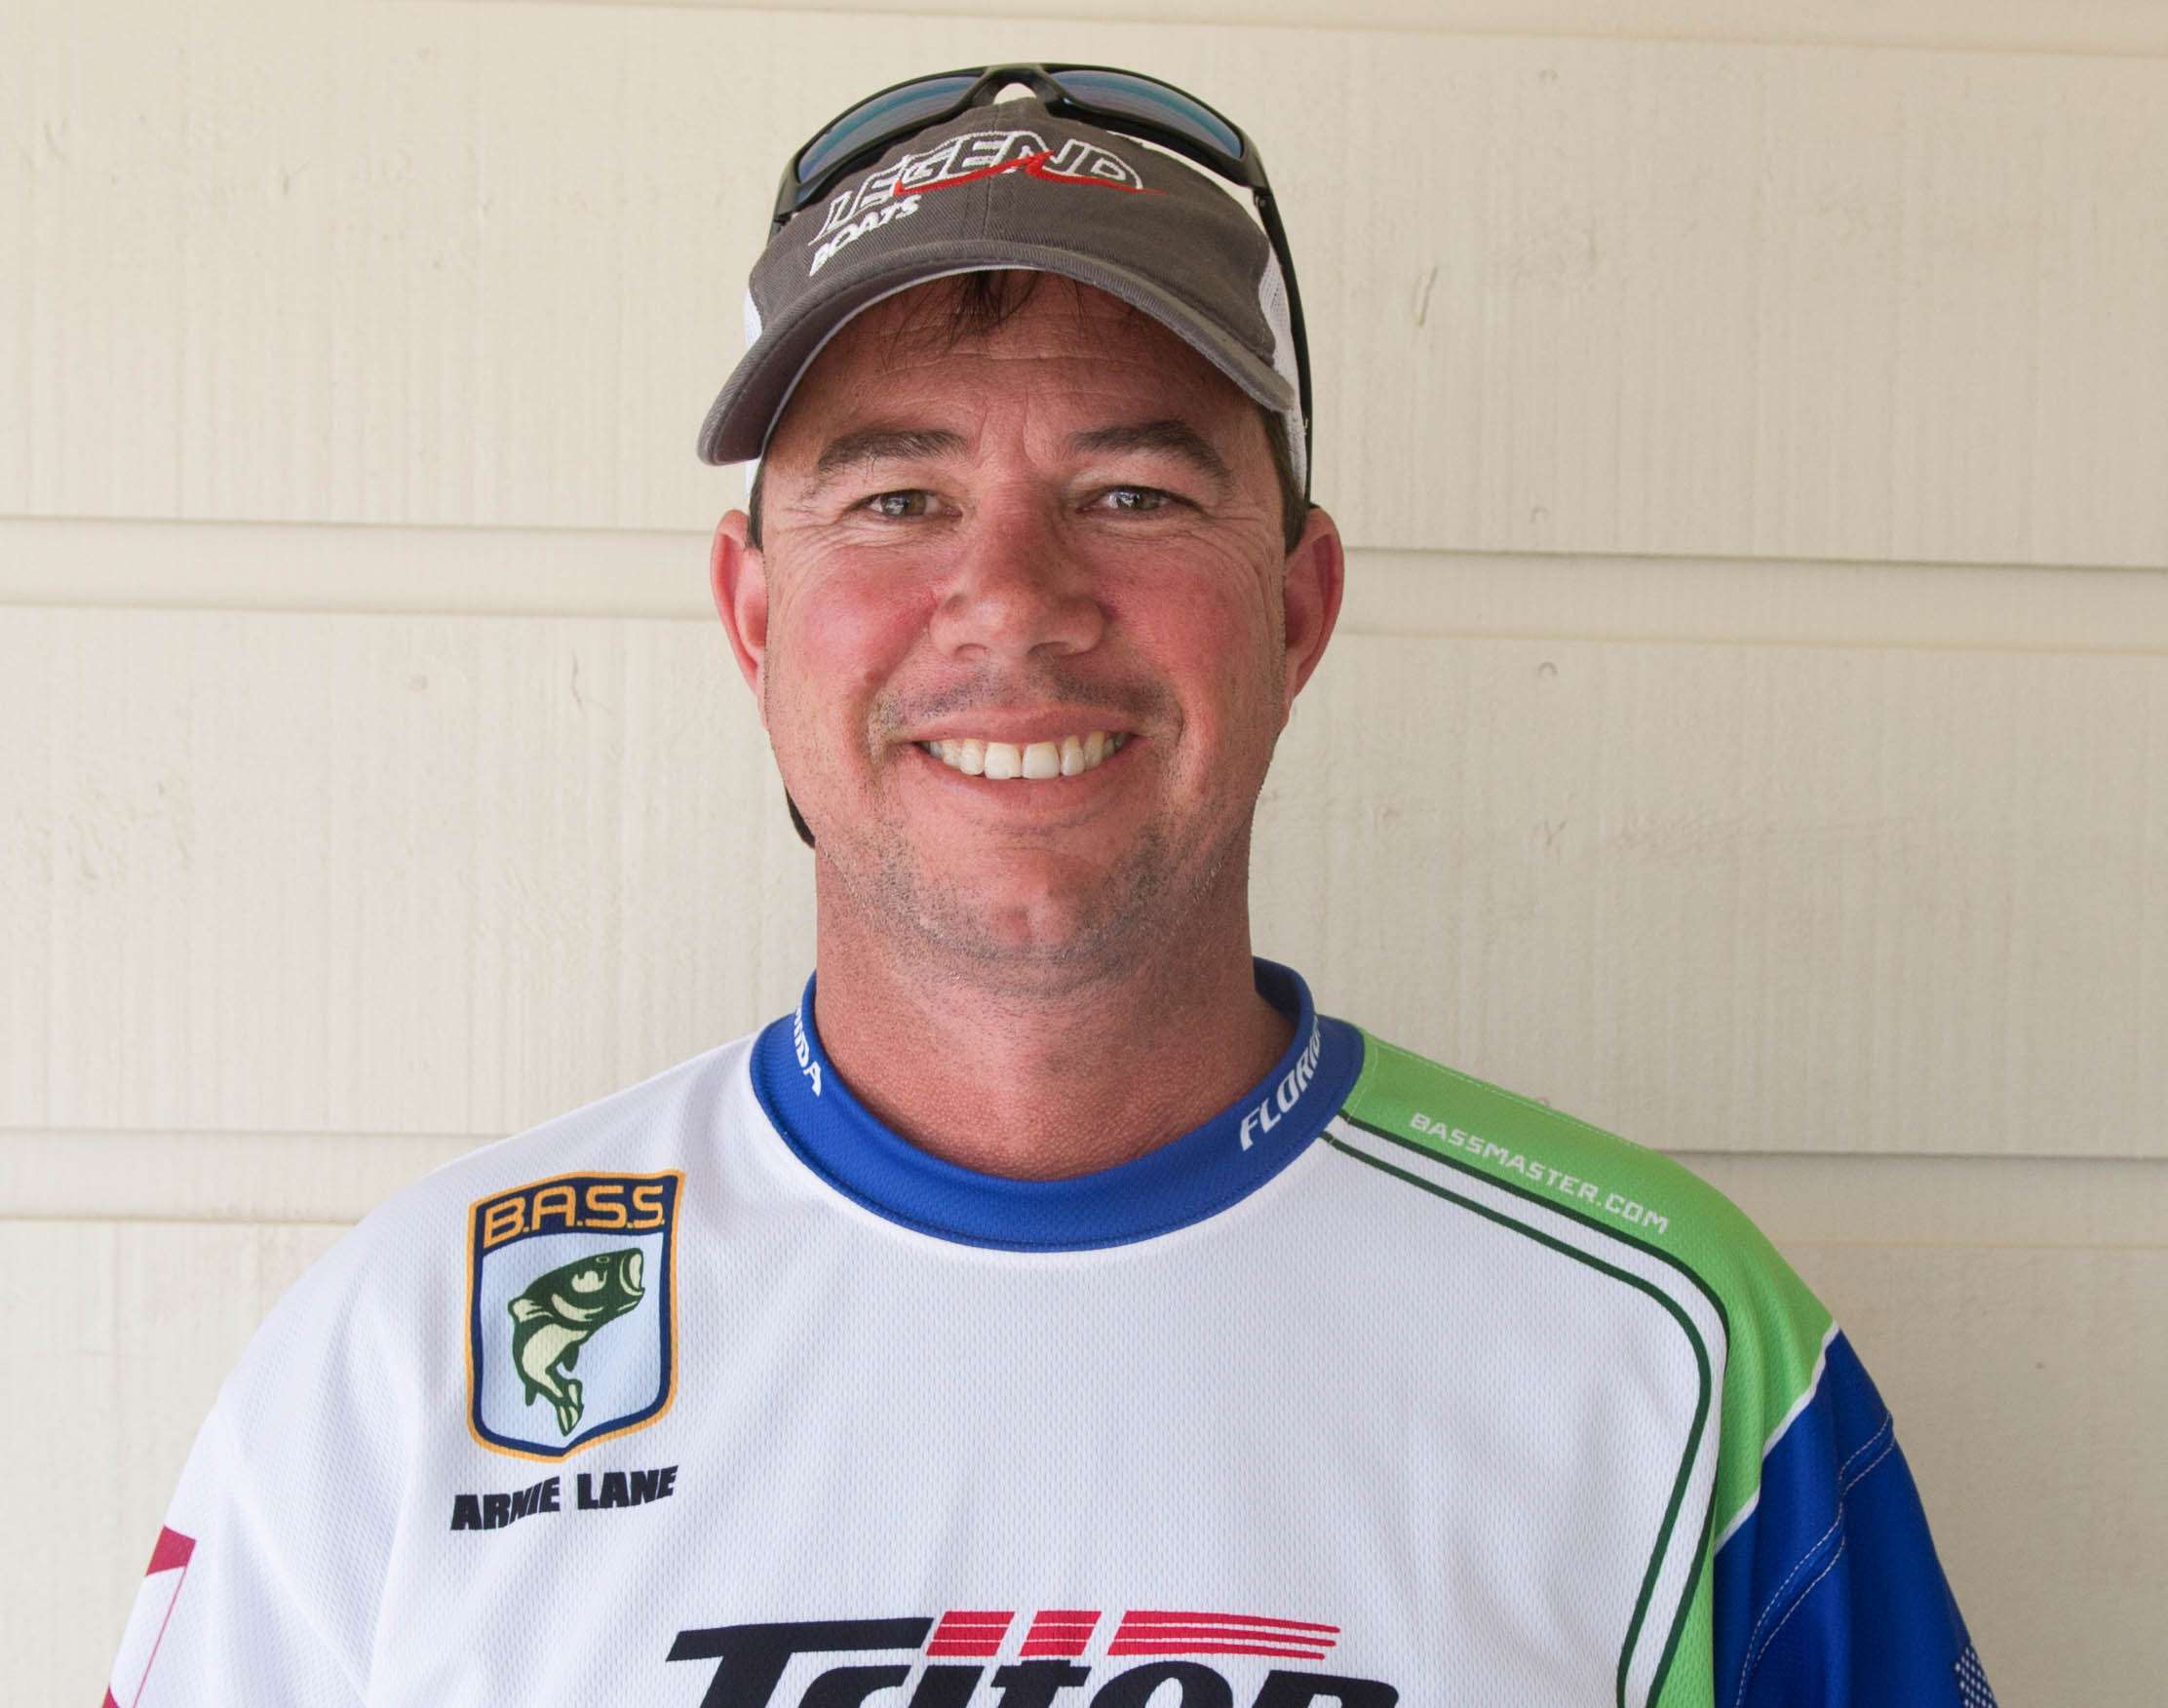 Arnie Lane <br>
Florida Boater <br>
Arnie Lane is well-known in bass fishing circles. If you donât know him from his own reputation winning tournaments, you surely know his Elite Series brothers, Bobby and Chris. Lane is a member of Floridaâs enormous club, the Lakeland Bassmasters. He works in sales, and for fun, he plays golf and cards with family and friends. His sponsors include Power-Pole, Legend Boats, Mercury Motors, Charleston Rubber & Gasket Co., Bobâs Machine Shop, Raymarine Electronics, Costa Del Mar Sunglasses and Reaction Innovations Baits. 